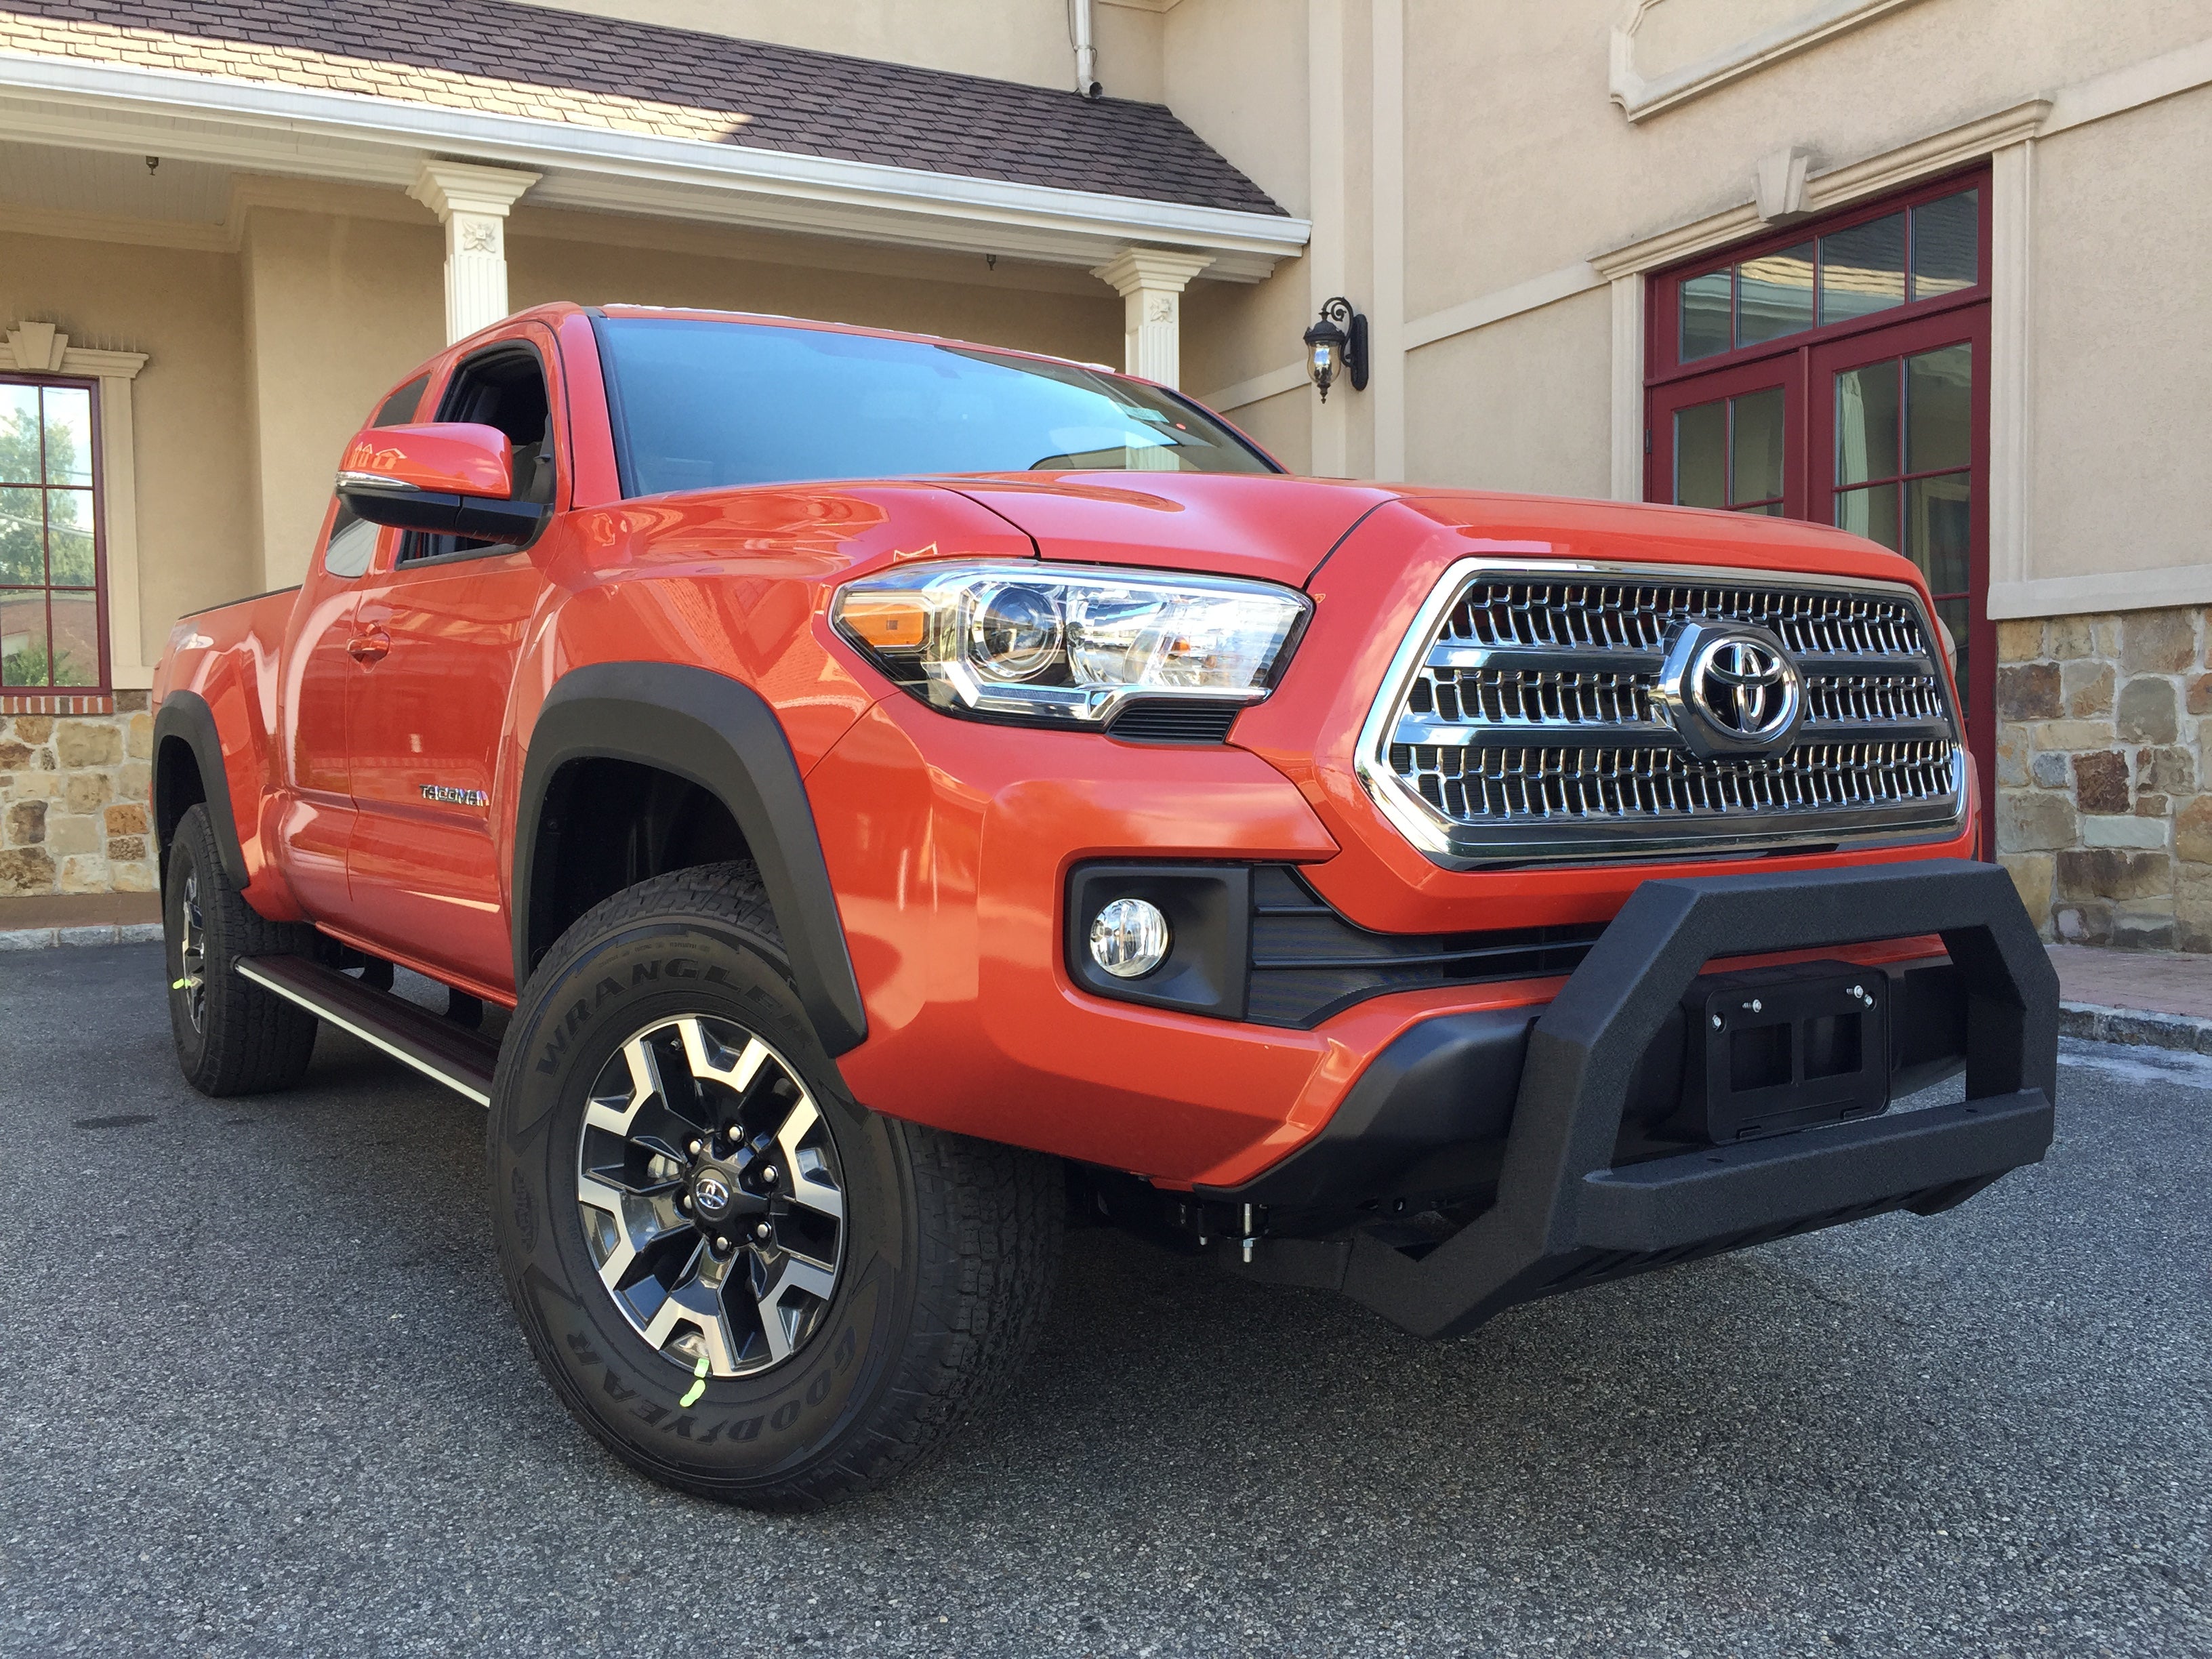 Red Toyota Tacoma with Exterior Parts and Off-Road Accessories. Front Bull Bar Bumper Guard installed in the front of the Toyota Tacoma. Broadfeet Running Boards installed on the passenger side of the Toyota Tacoma.